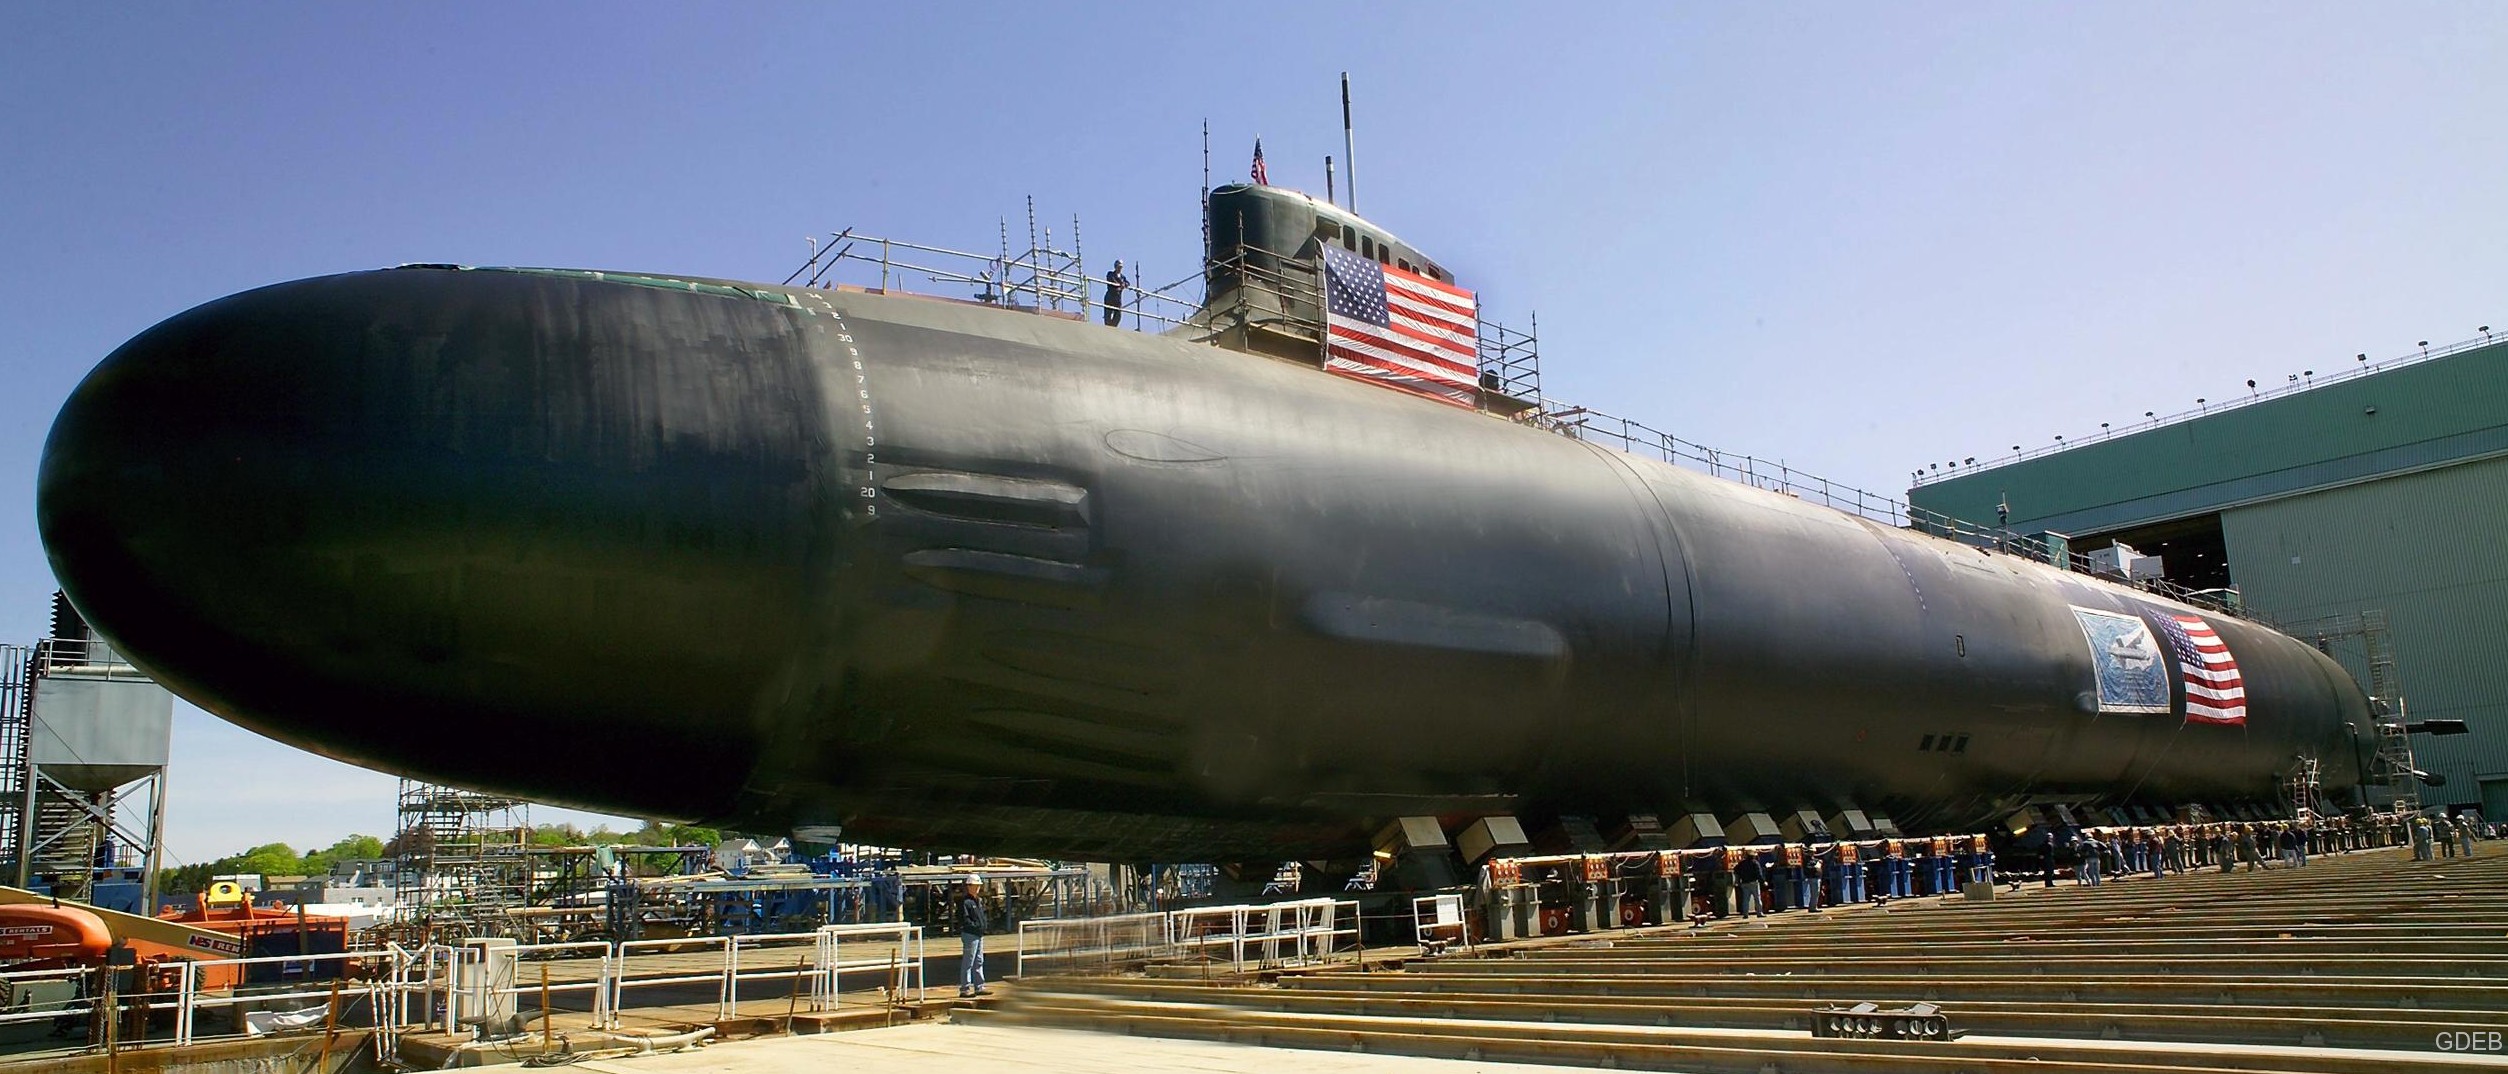 ssn-23 uss jimmy carter seawolf class attack submarine us navy general dynamics electric boat groton connecticut 17